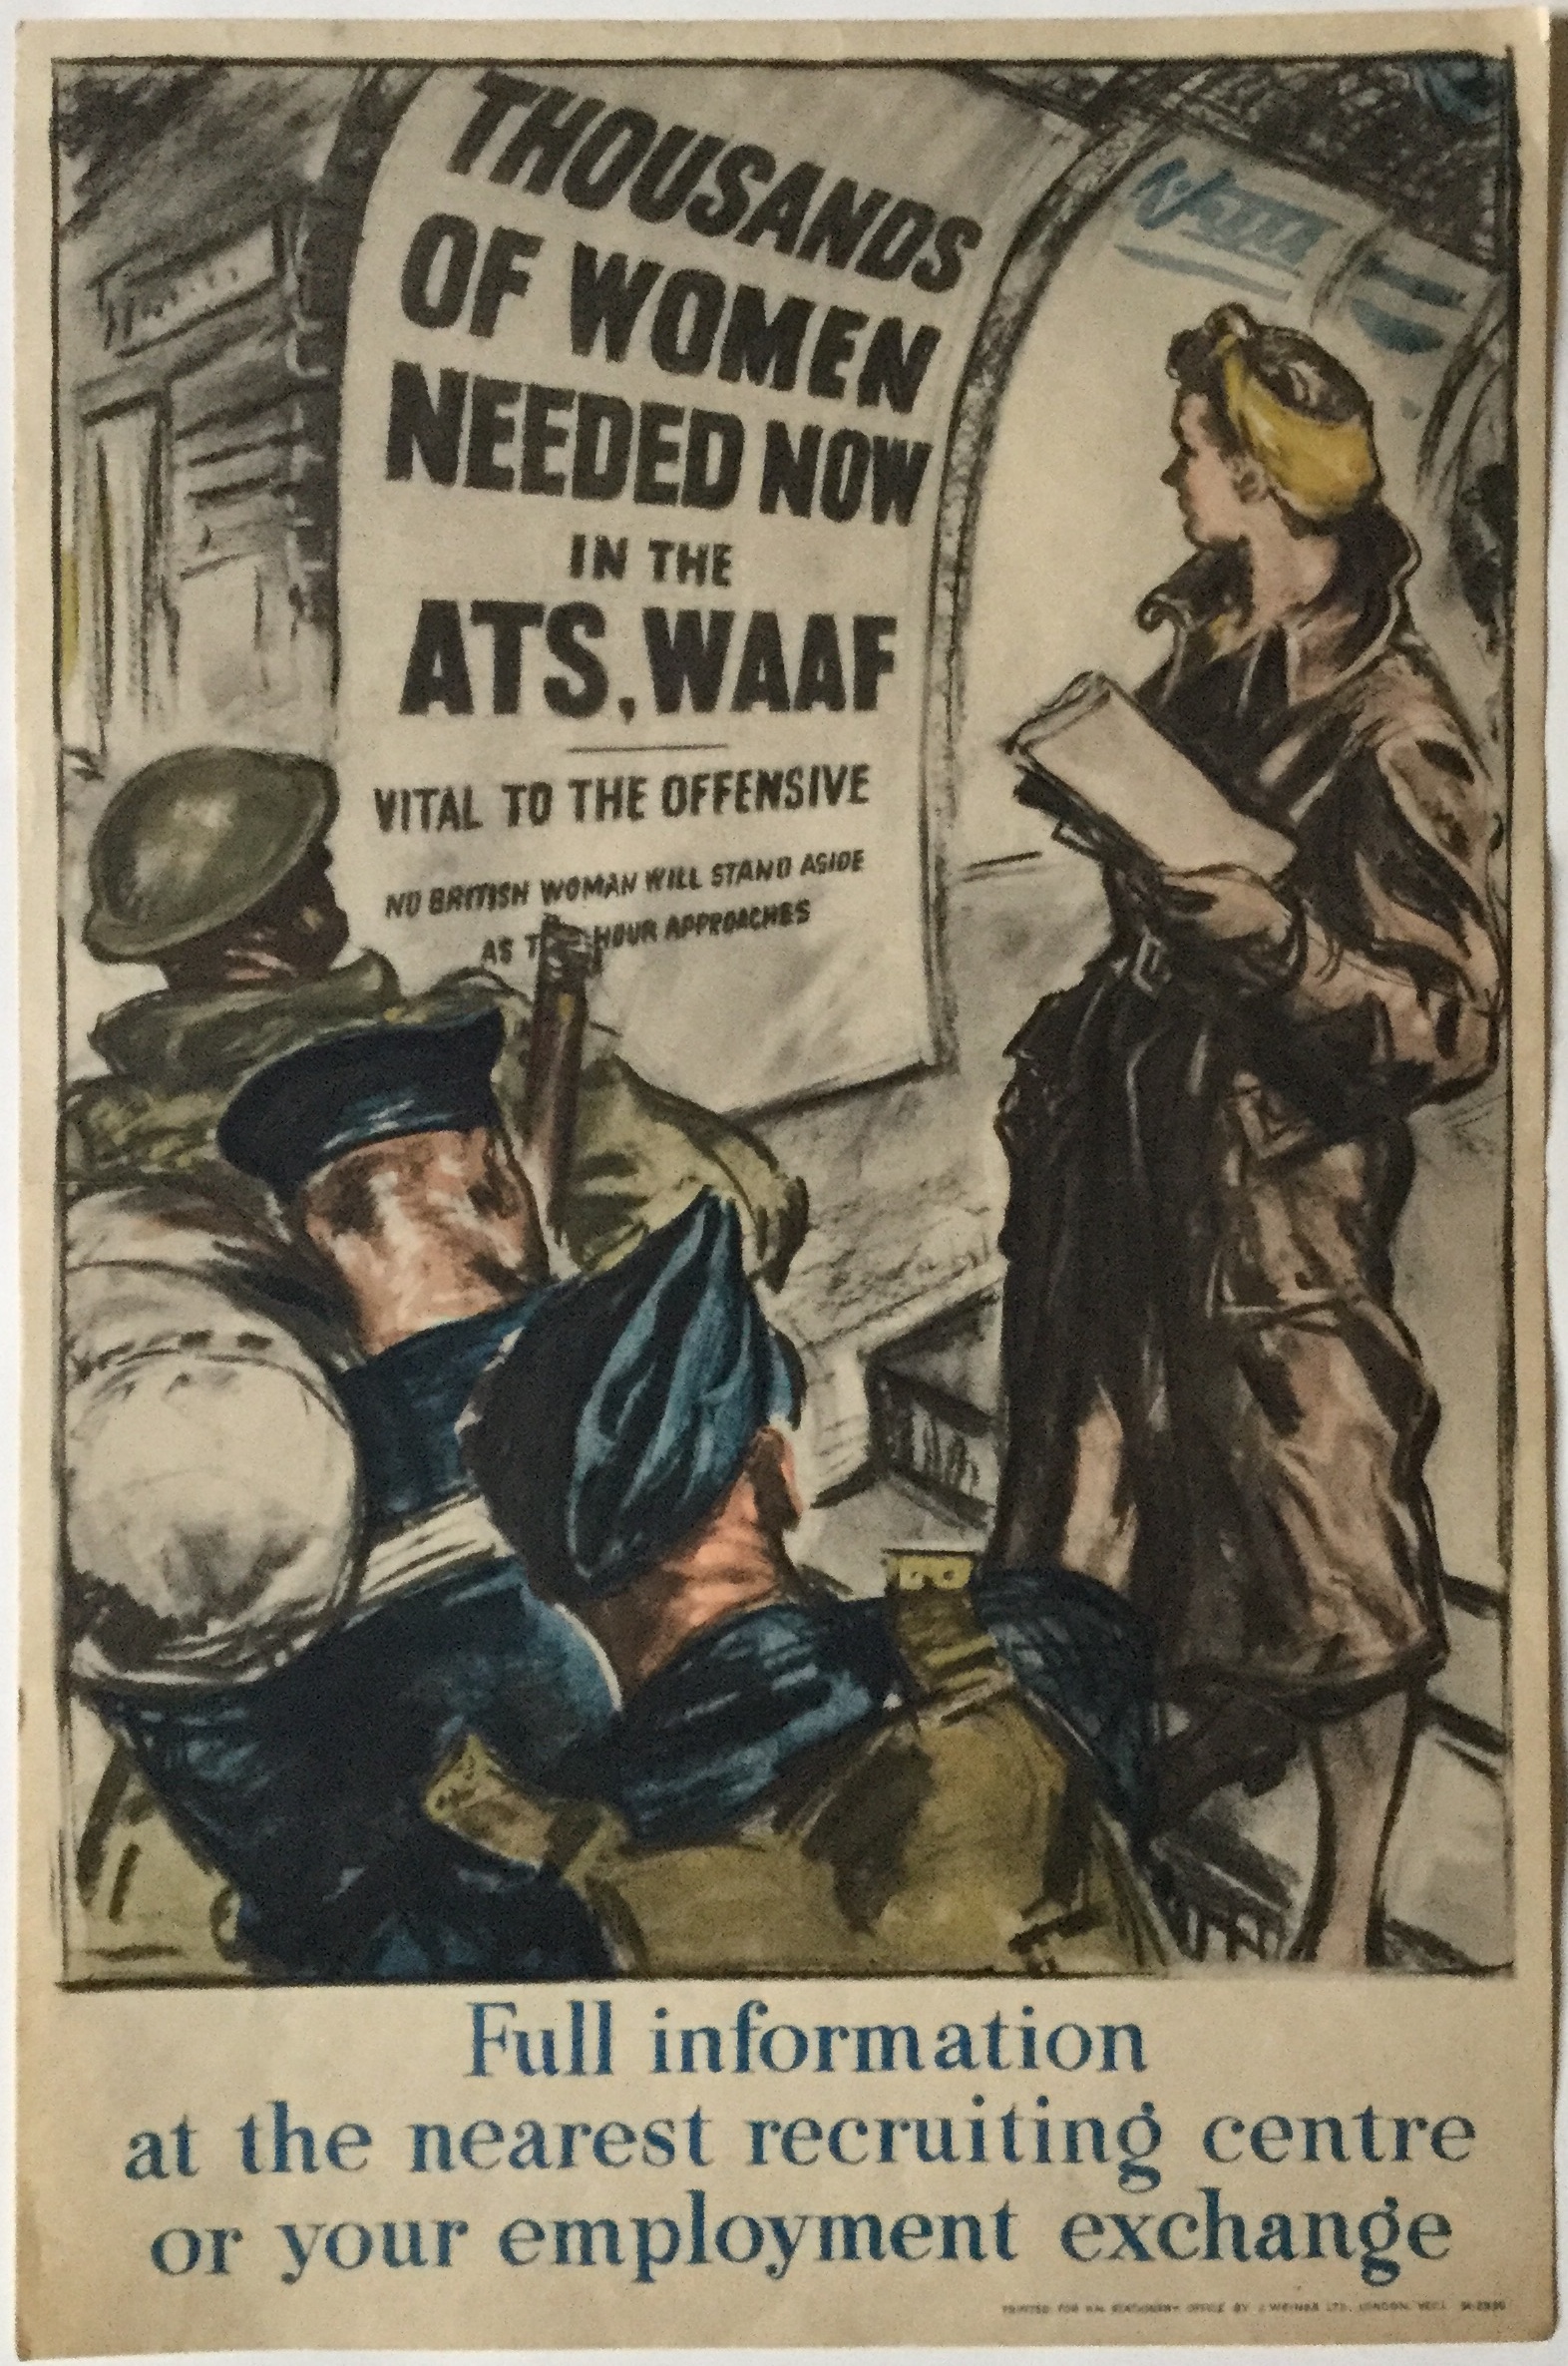 J408	THOUSANDS OF WOMEN NEEDED NOW IN THE ATS, WAAF - VITAL TO THE OFFENSIVE “NO BRITISH WOMAN WILL STAND ASIDE AS THE HOUR APPROACHES” - FULL INFORMATION AT THE NEAREST RECRUITING CENTRE